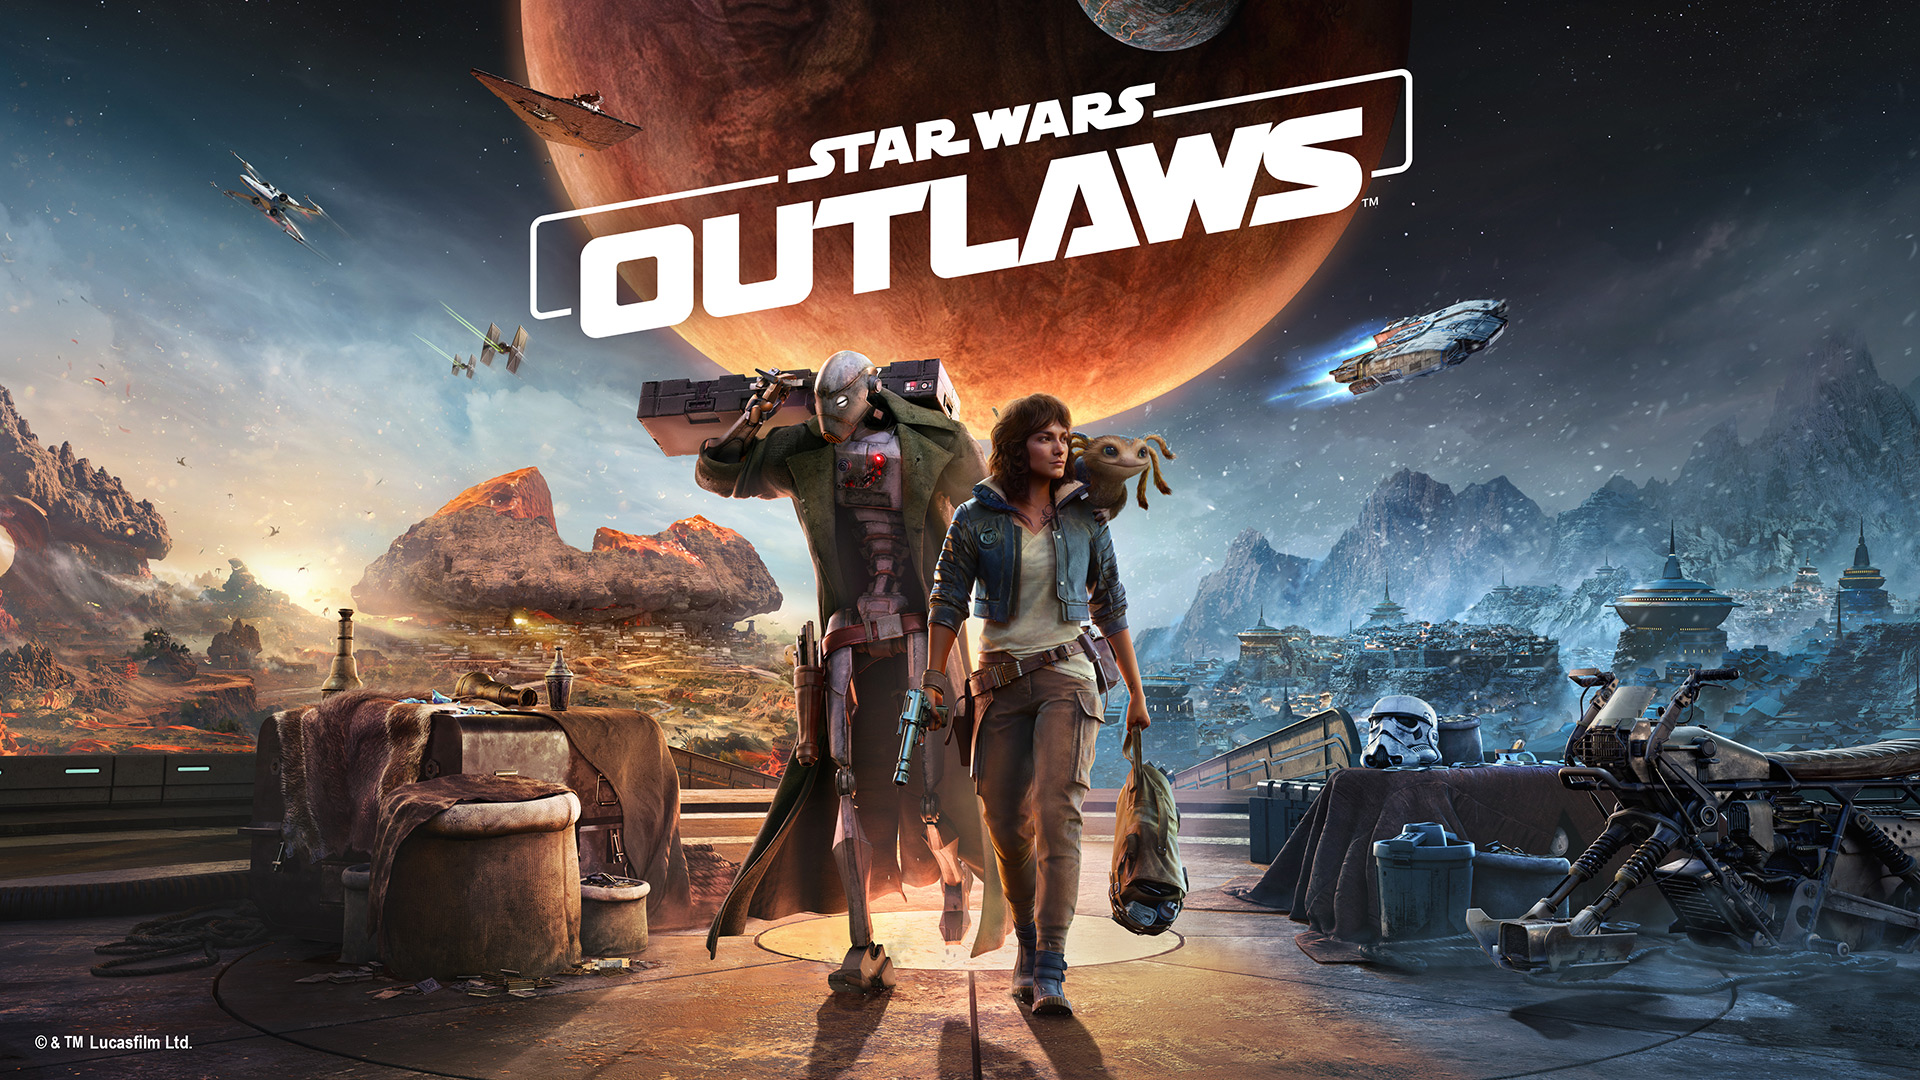 Star Wars Outlaws won't release until 2024, but here's our first look at gameplay